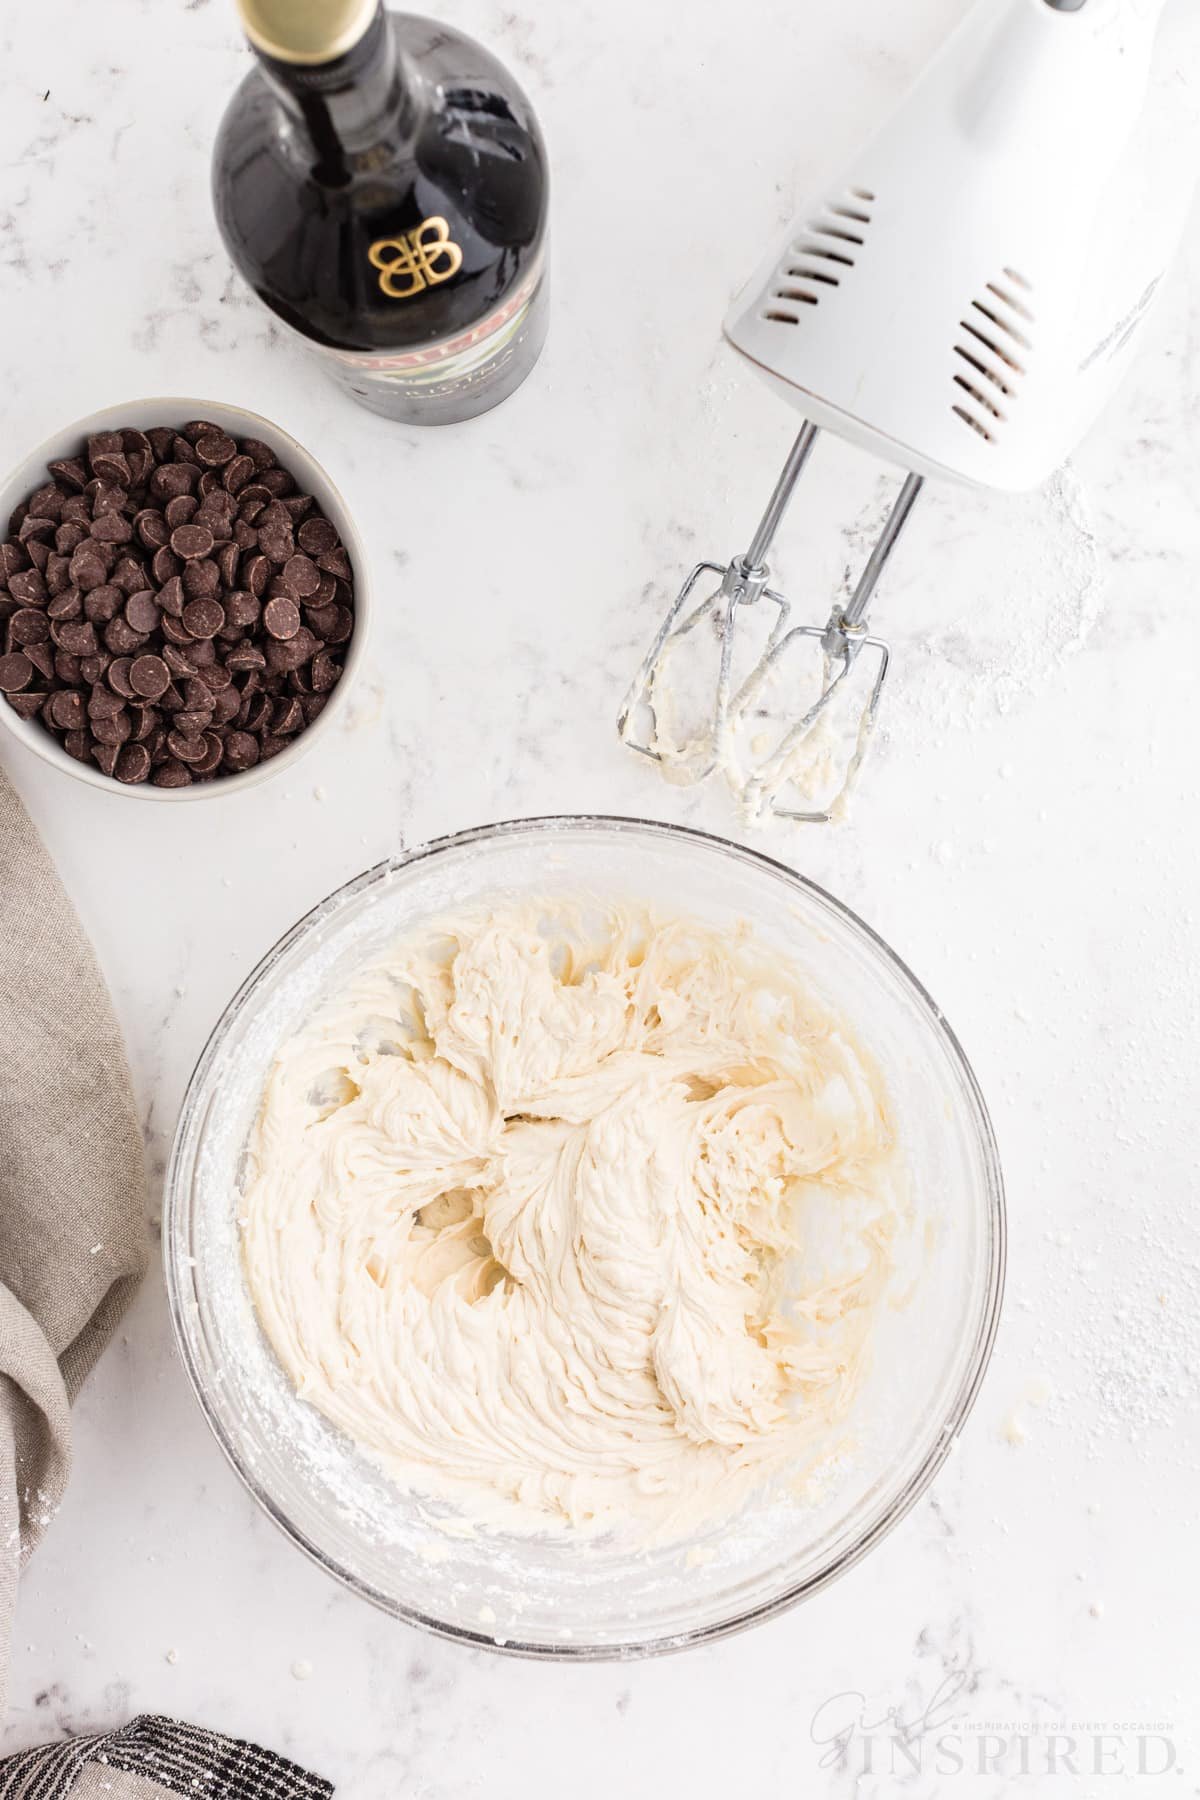 Bowl of buttercream, electric mixer, bottle of Bailey's Irish cream, bowl of chocolate chips, linen, on a marble countertop.